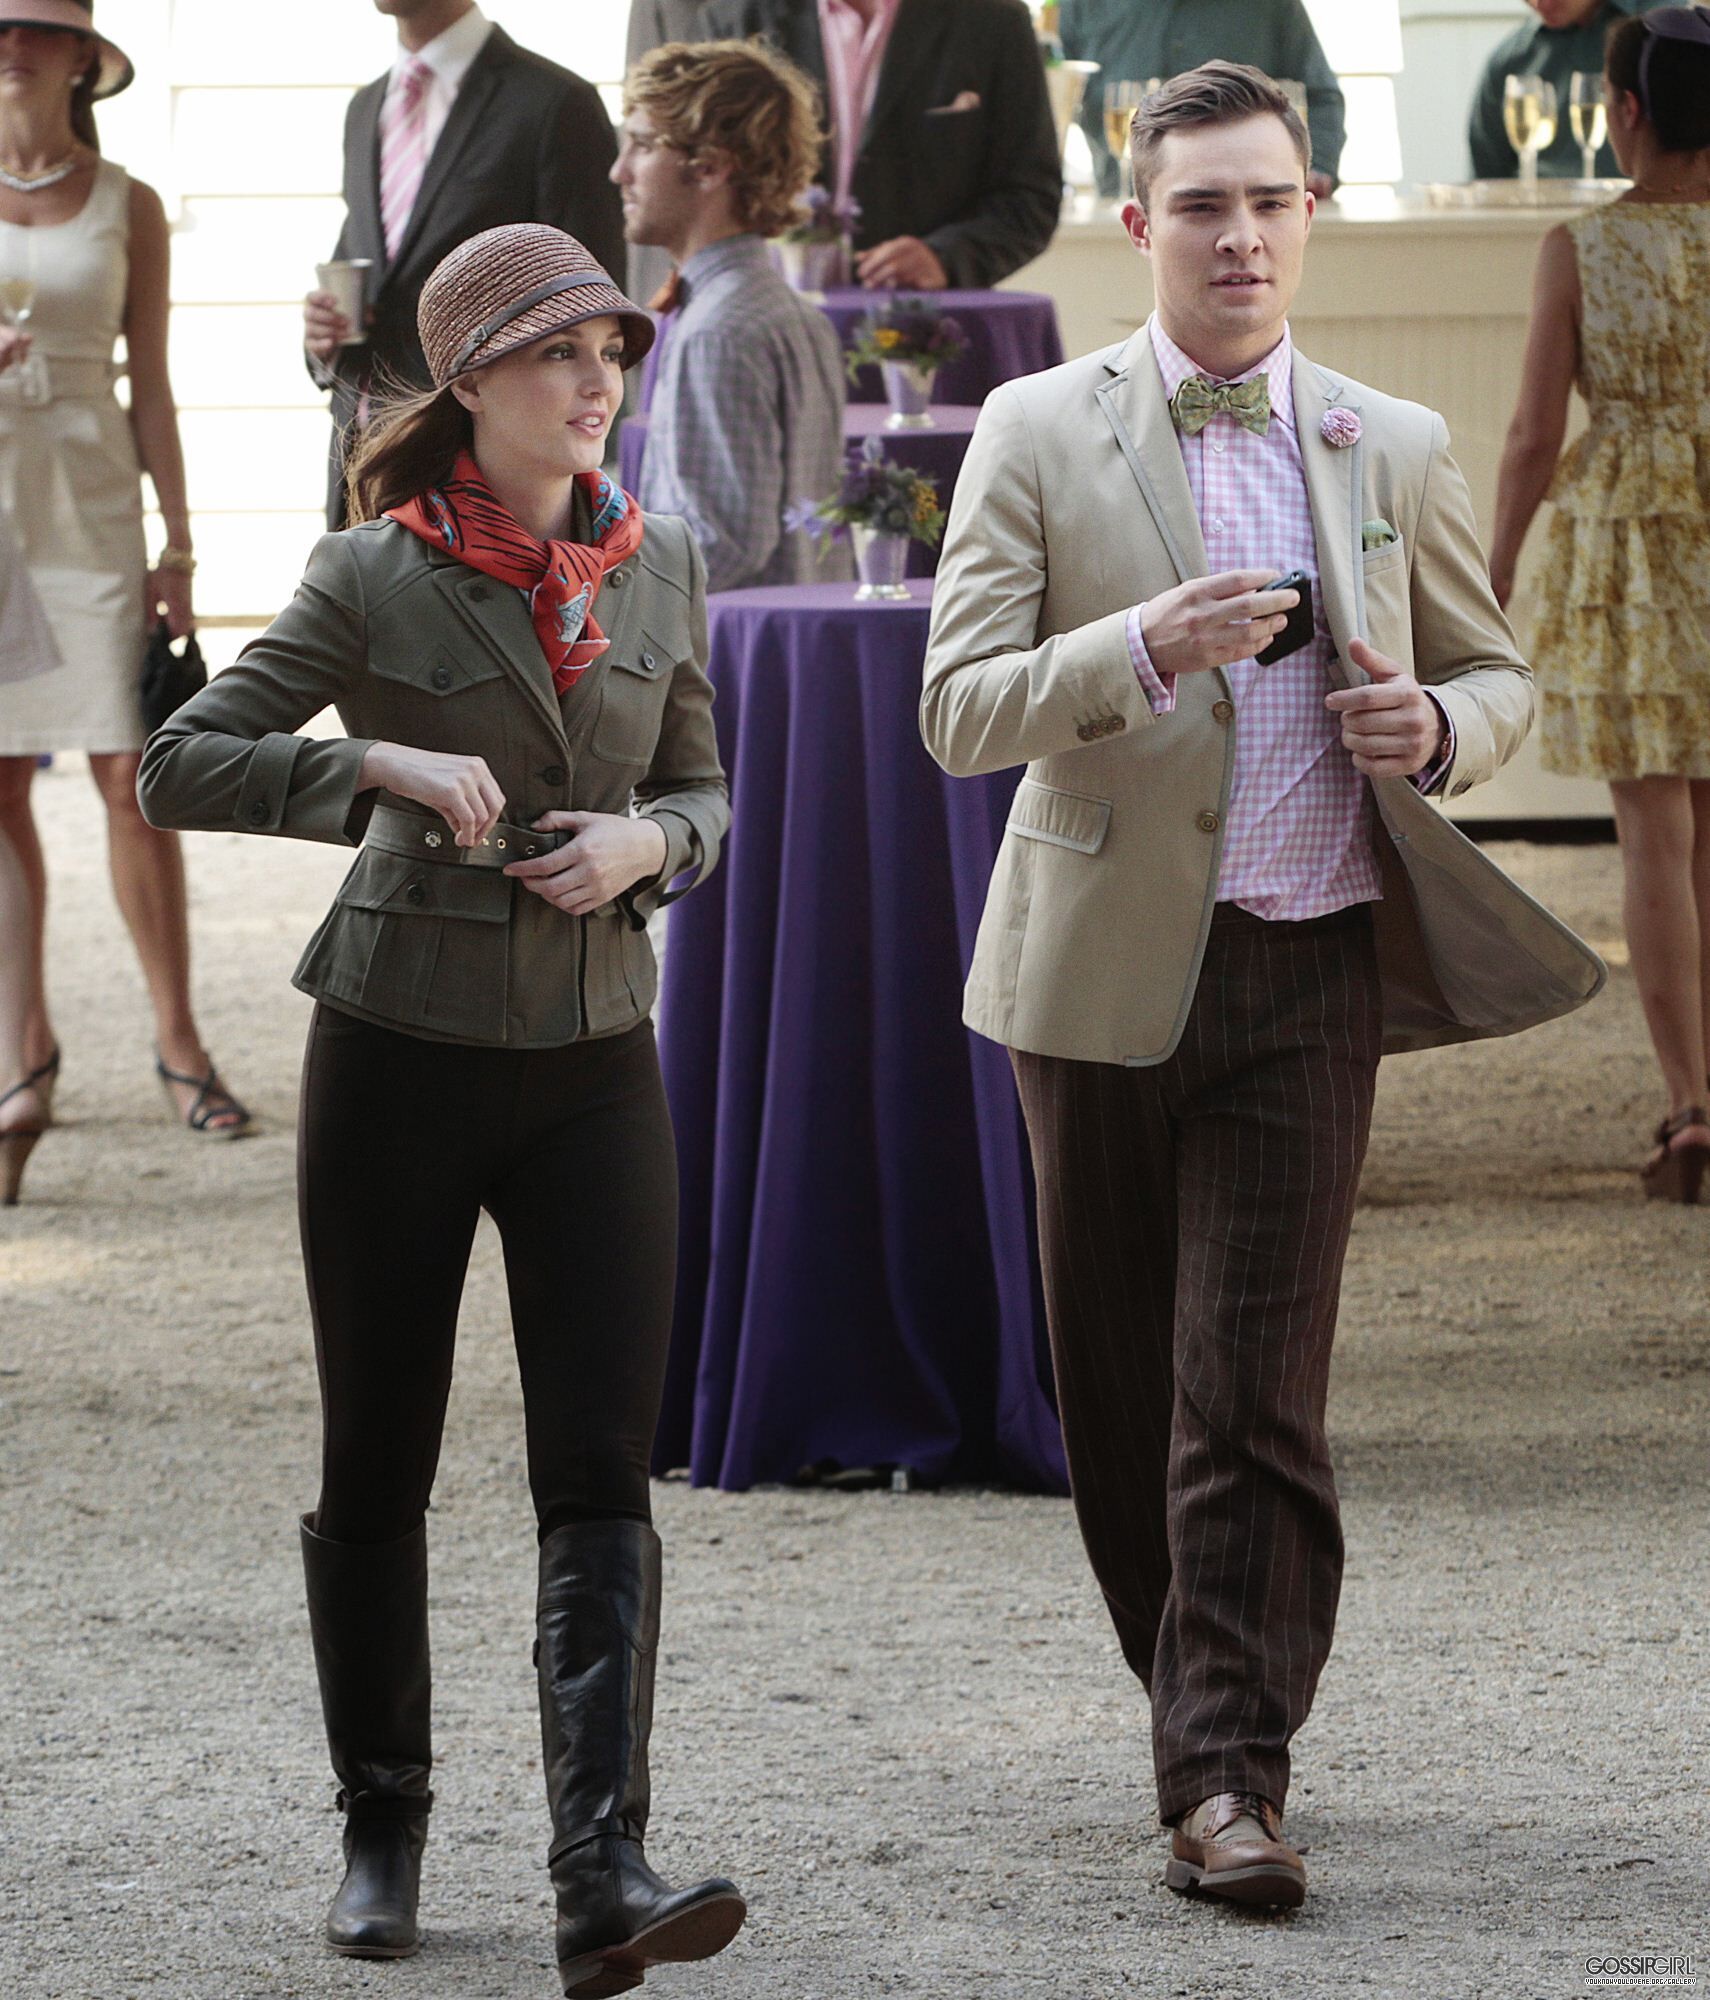 Gossip Girl': Should Chuck and Blair Have Ended up Together?